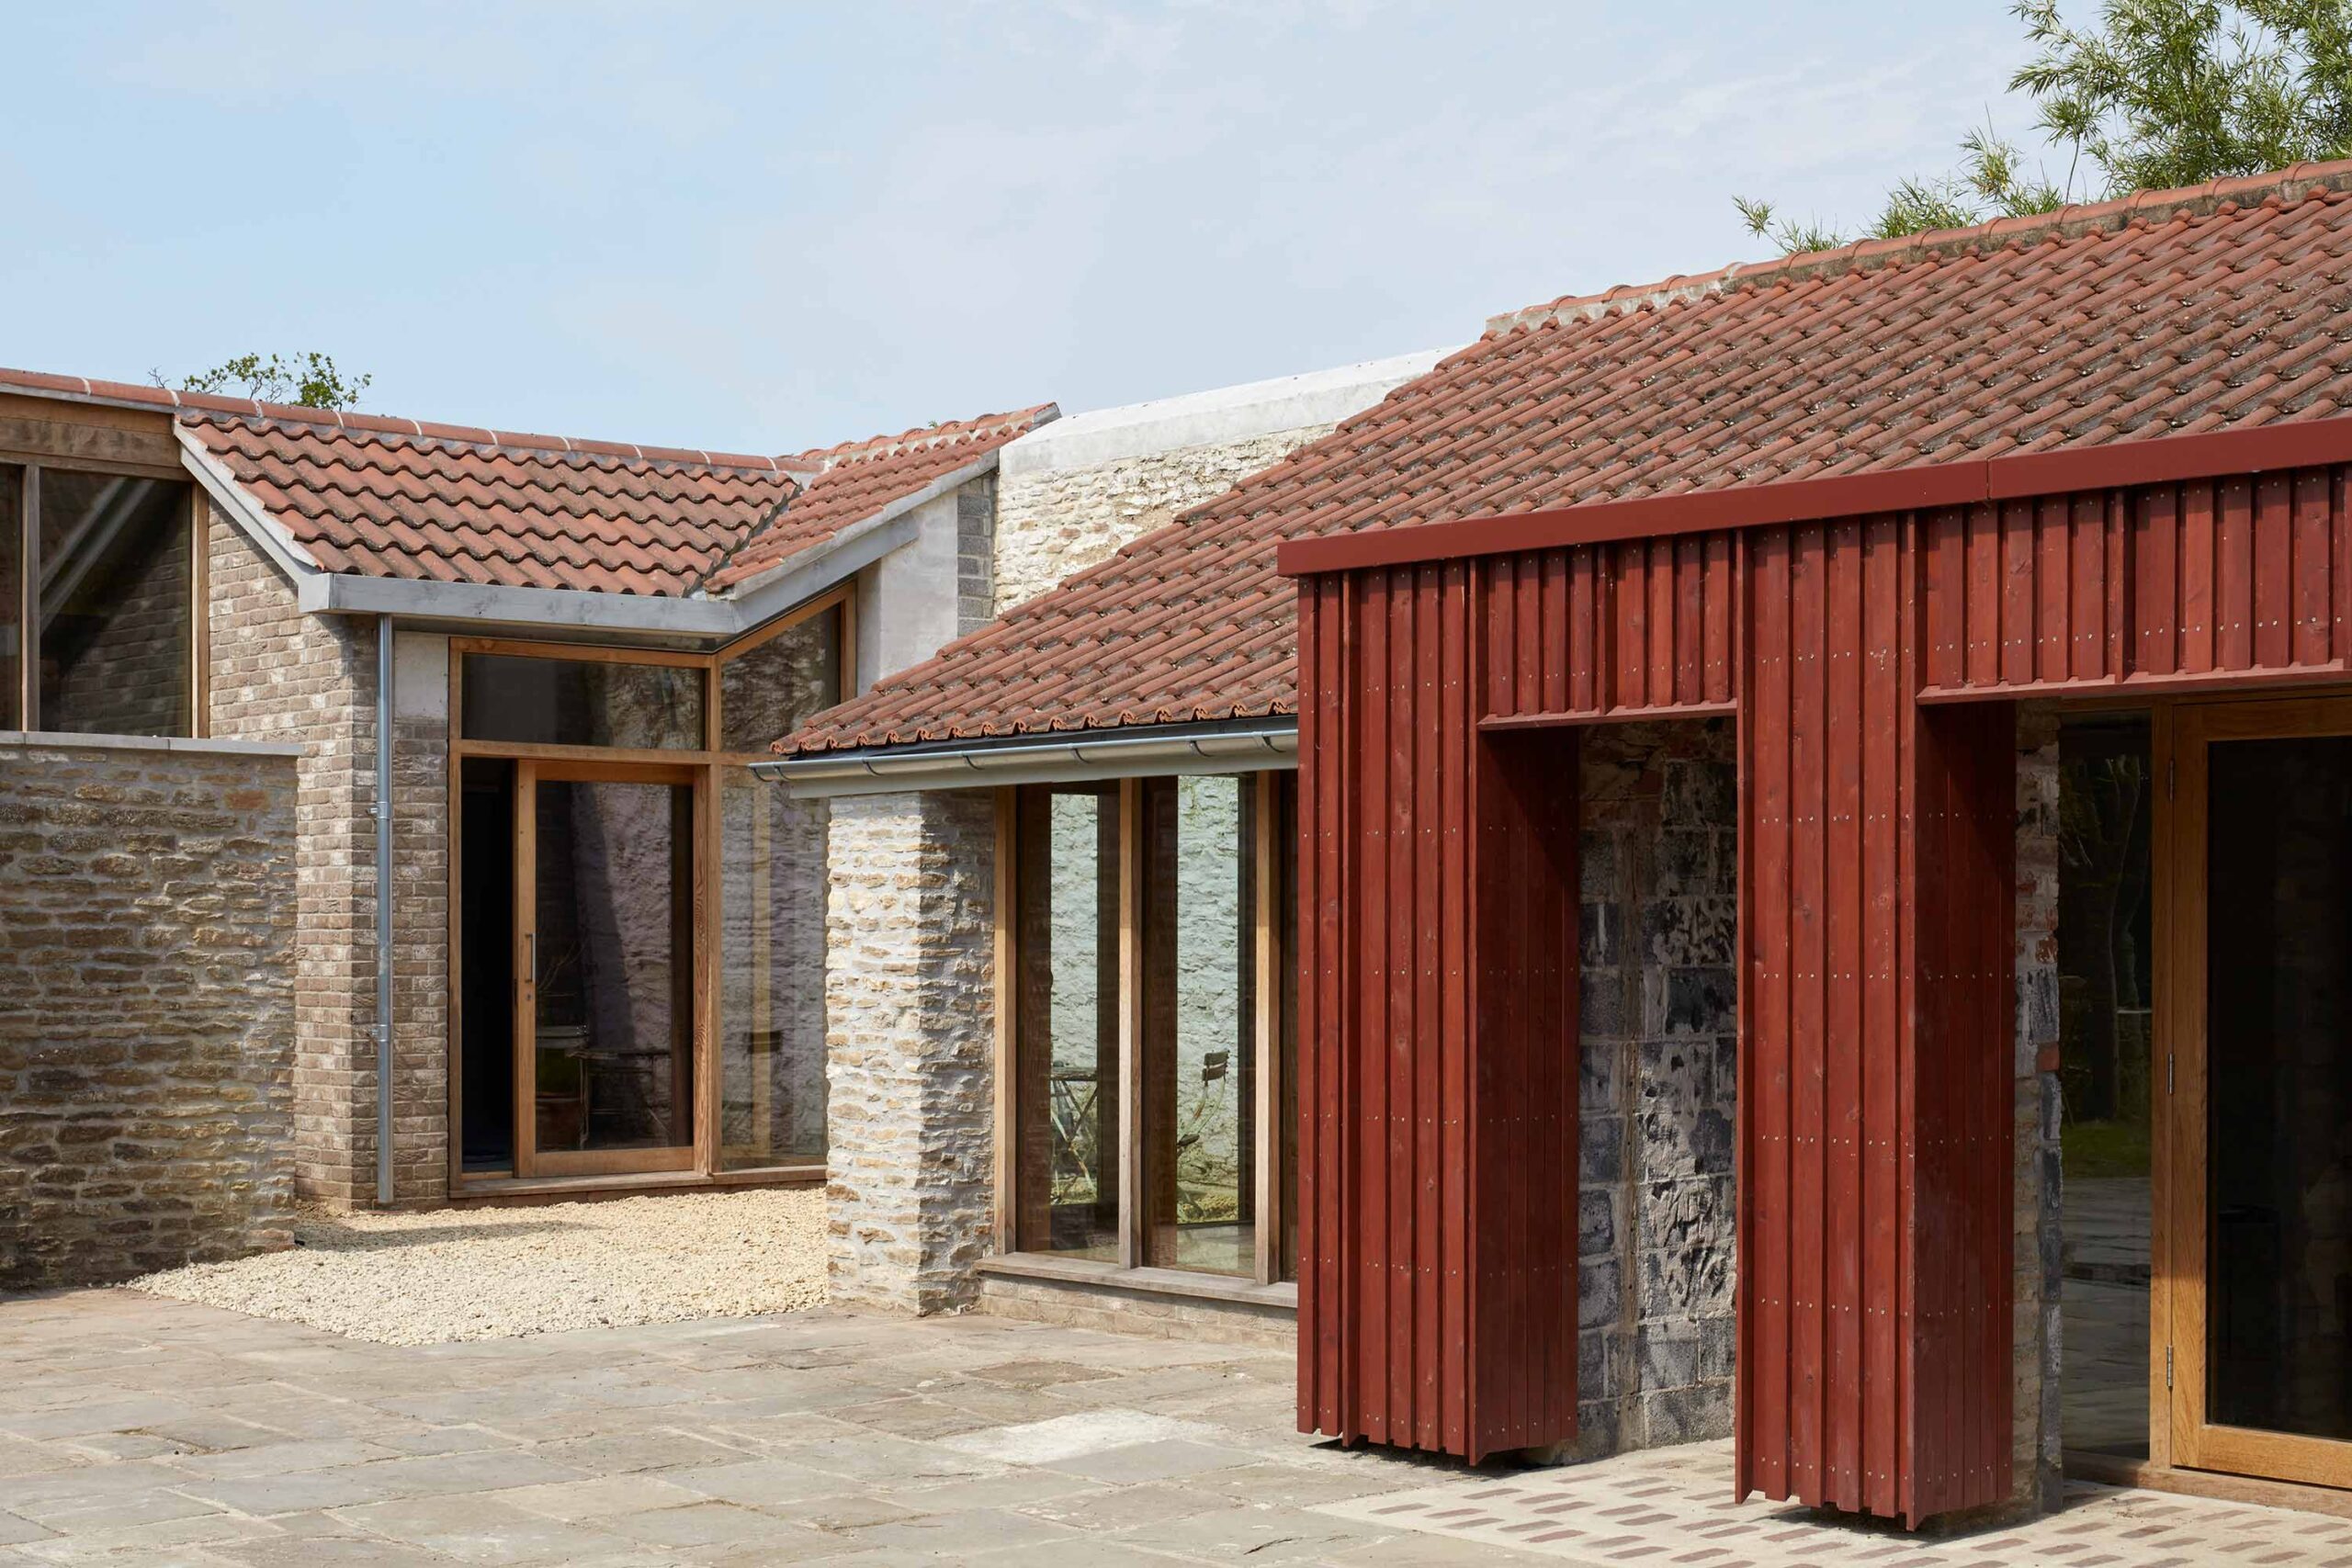 Mini courtyards were inserted into the plan, improving cross ventilation and outdoor access. 